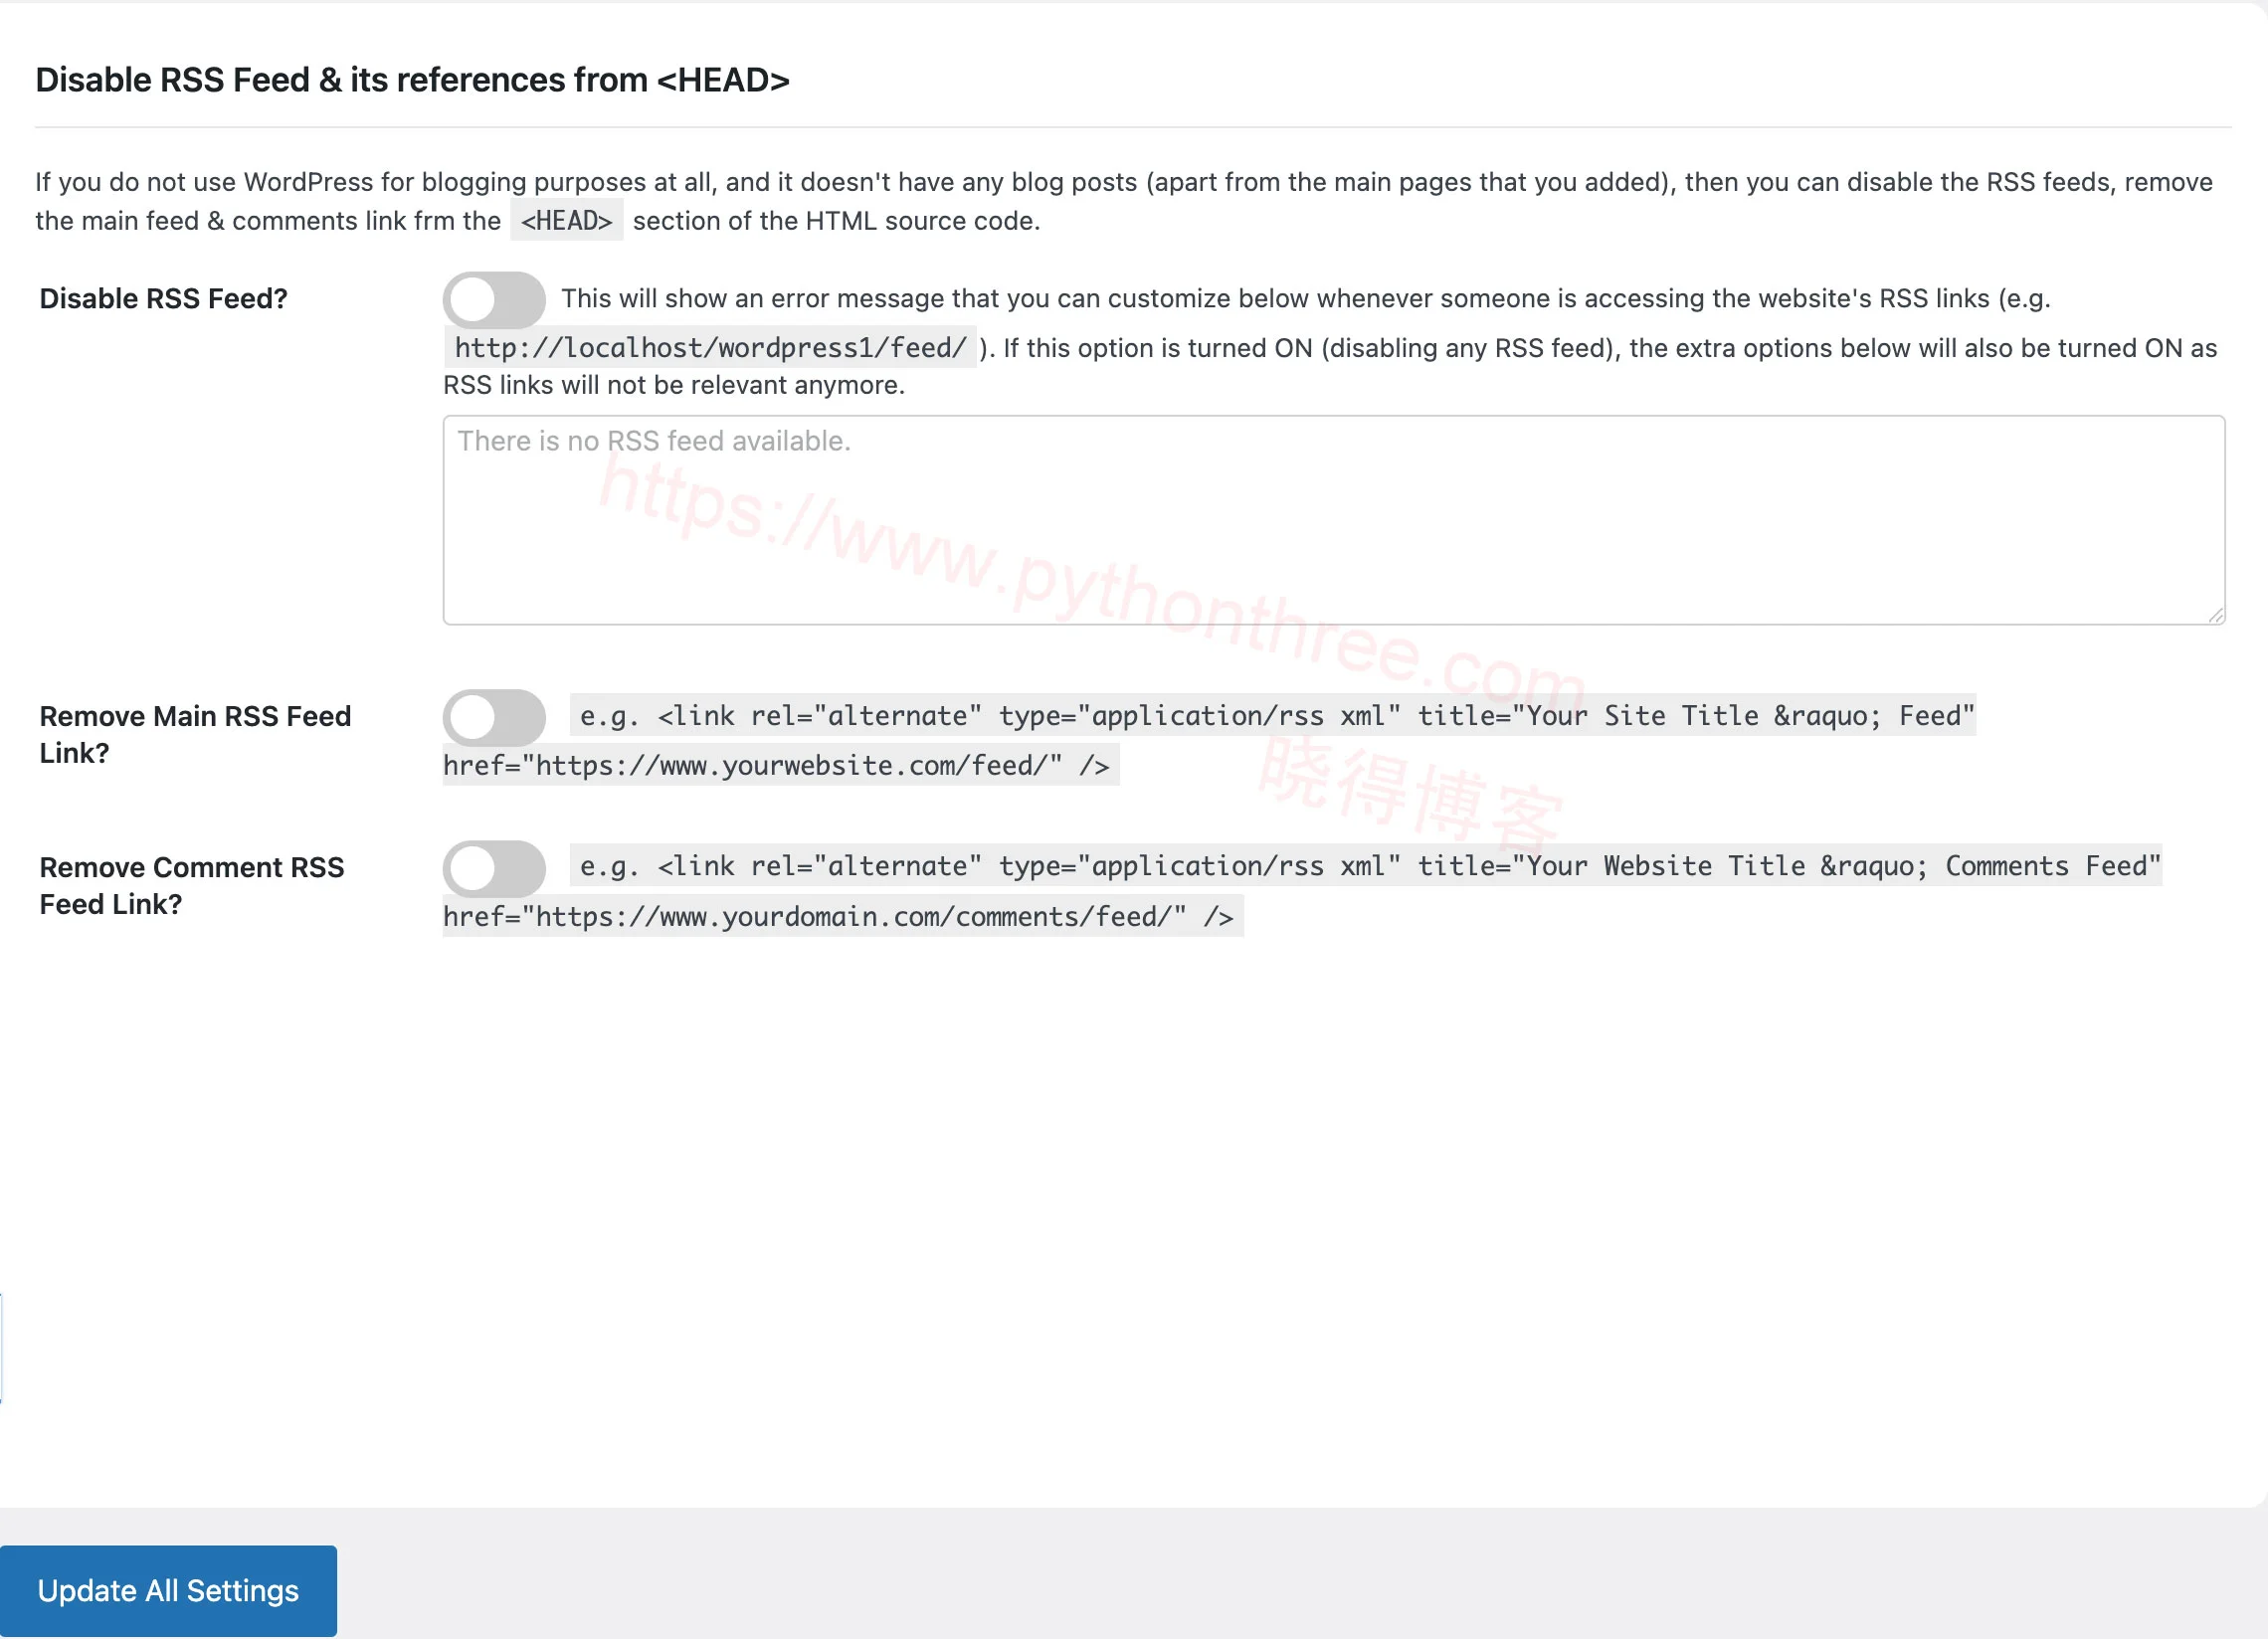 Disable RSS Feed禁用RSS Feed